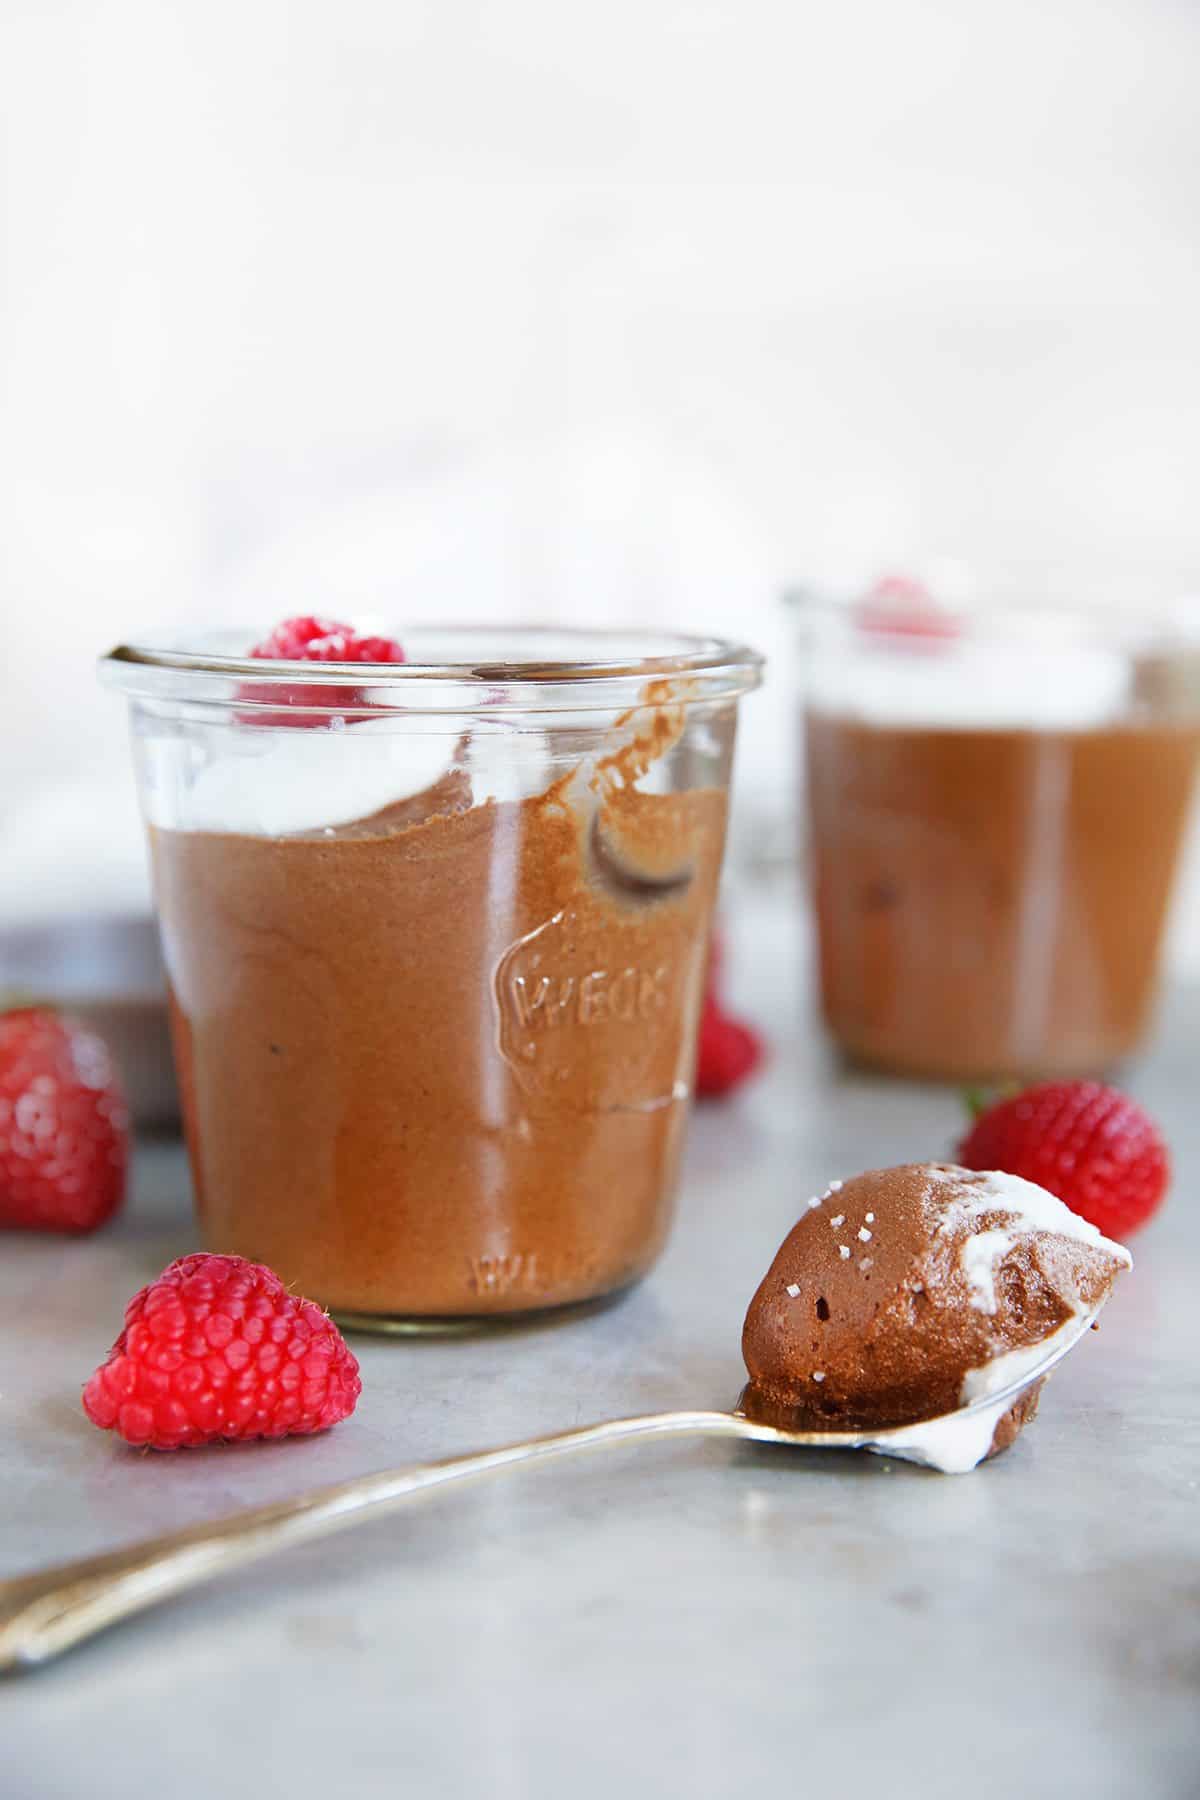 Classic Chocolate Mousse - Lexi's Clean Kitchen